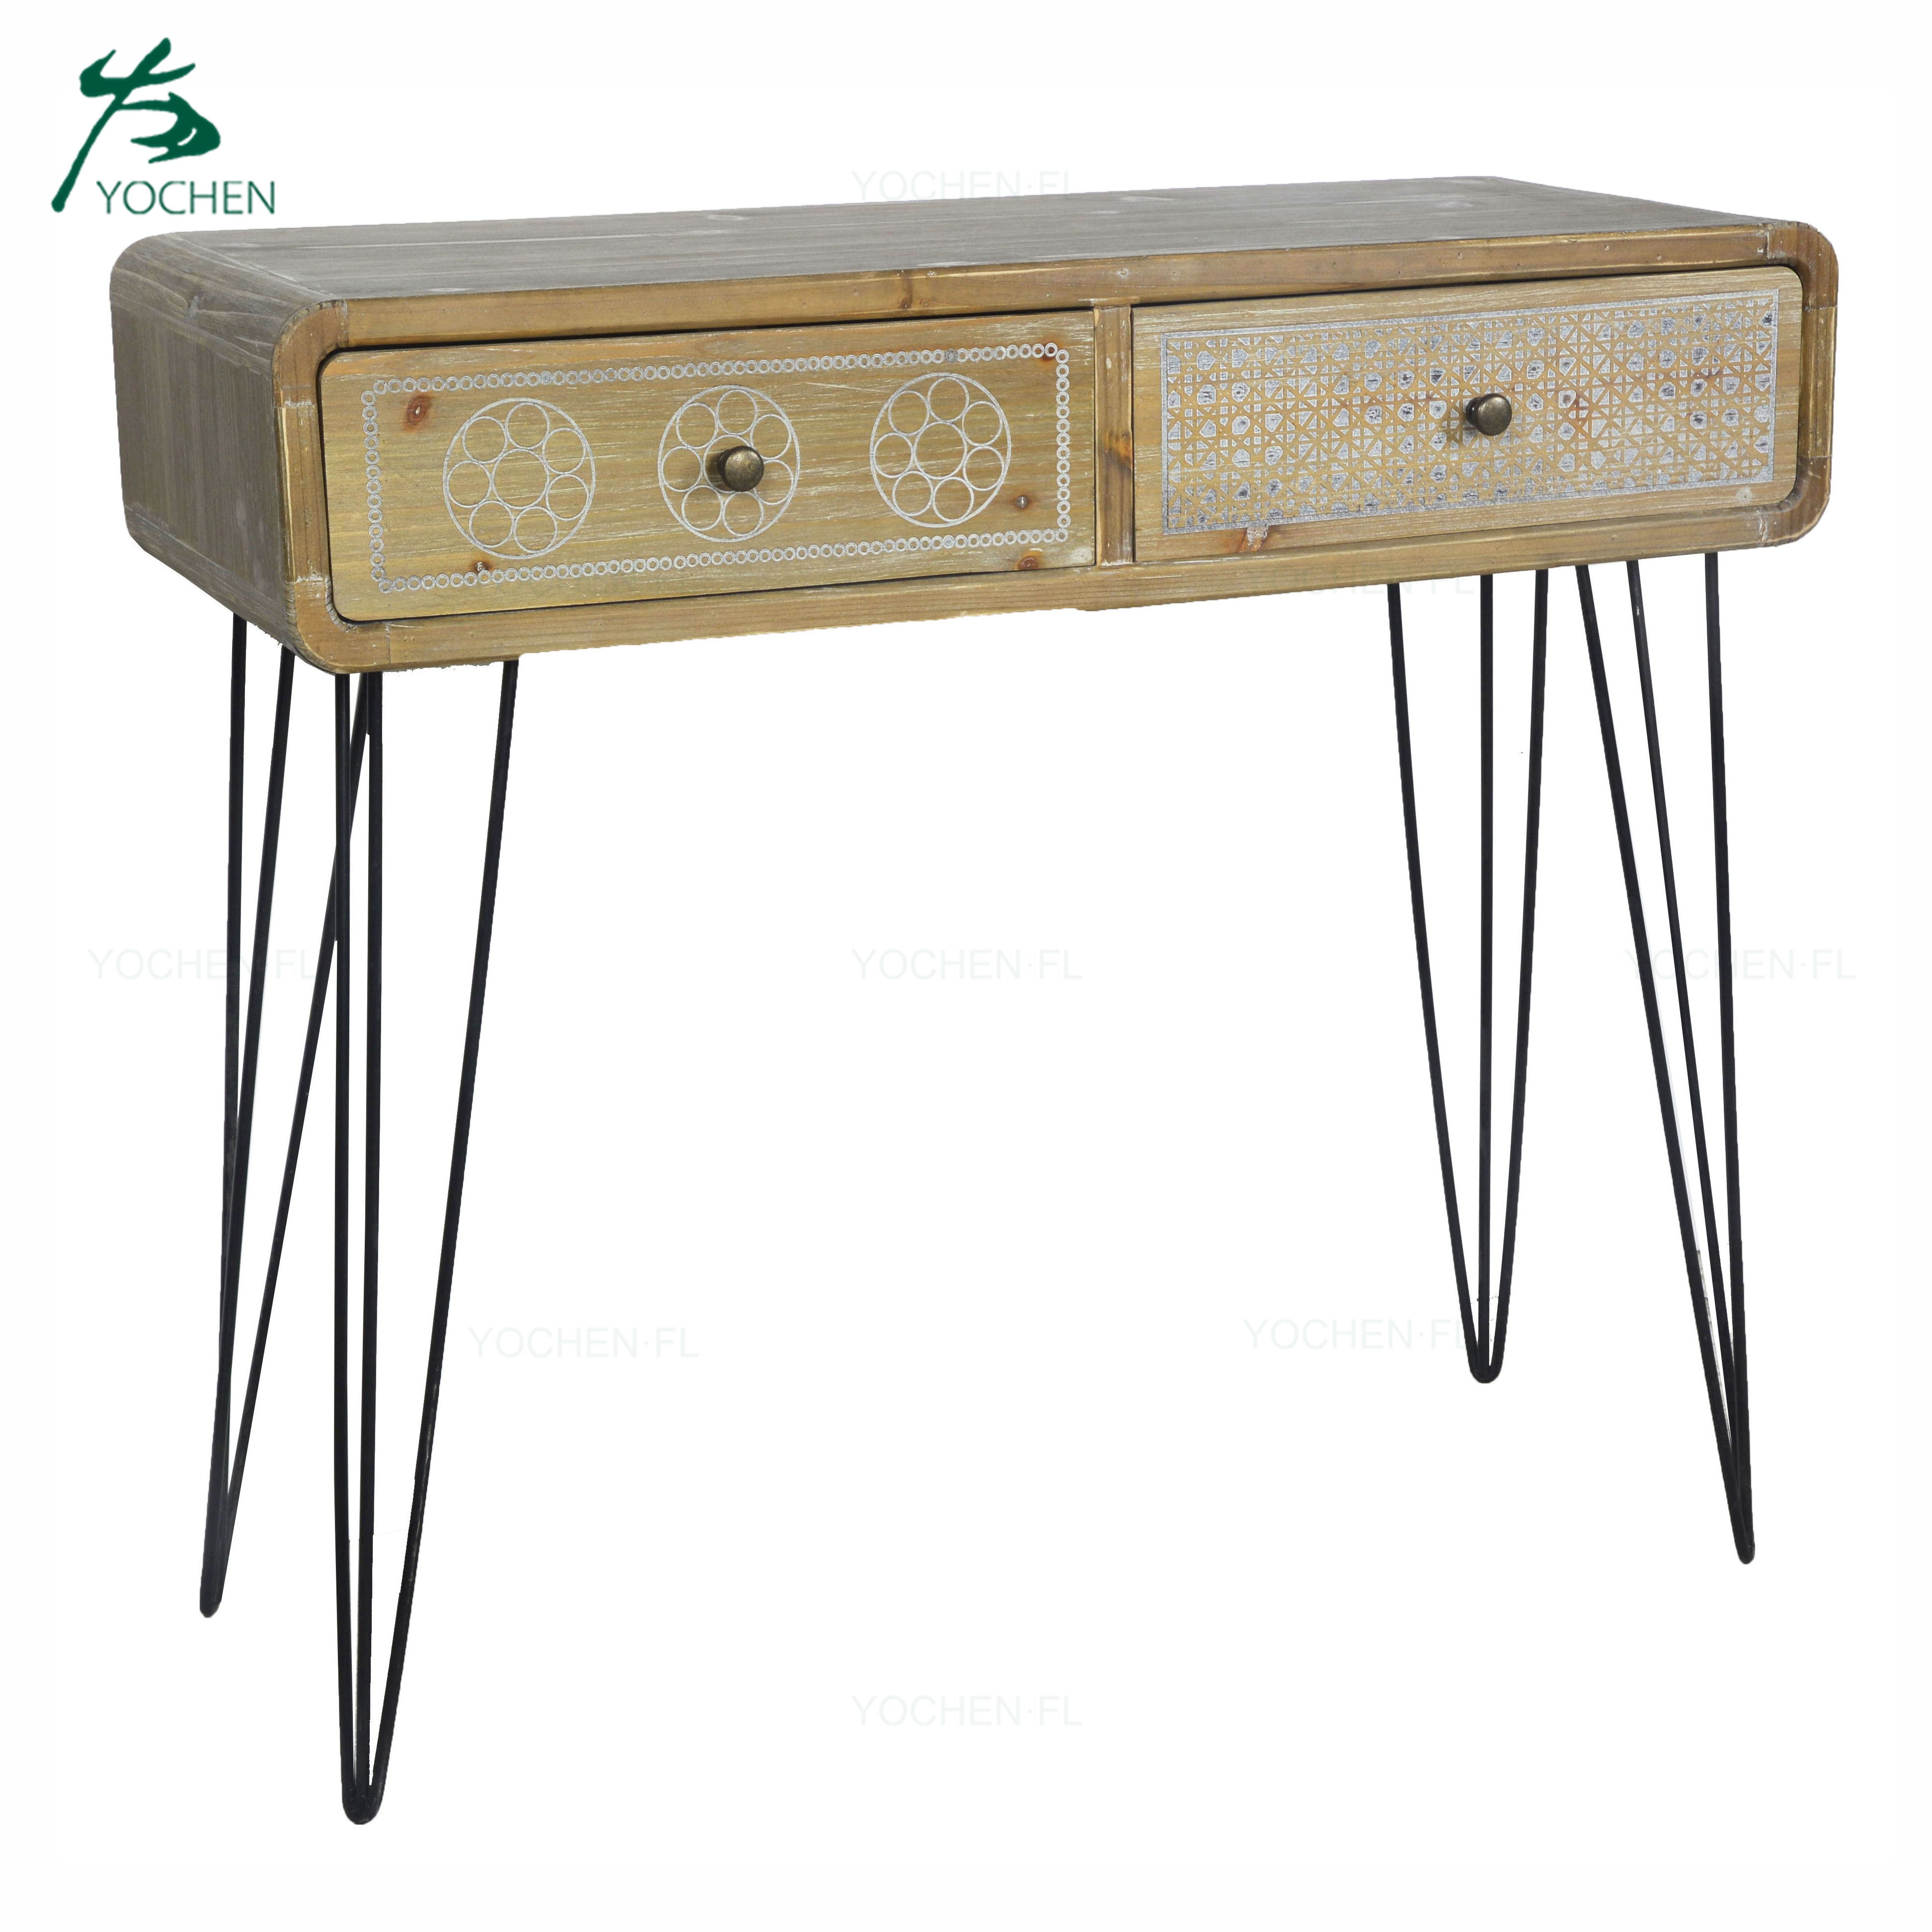 decorative living room furniture wood carving natural color console table